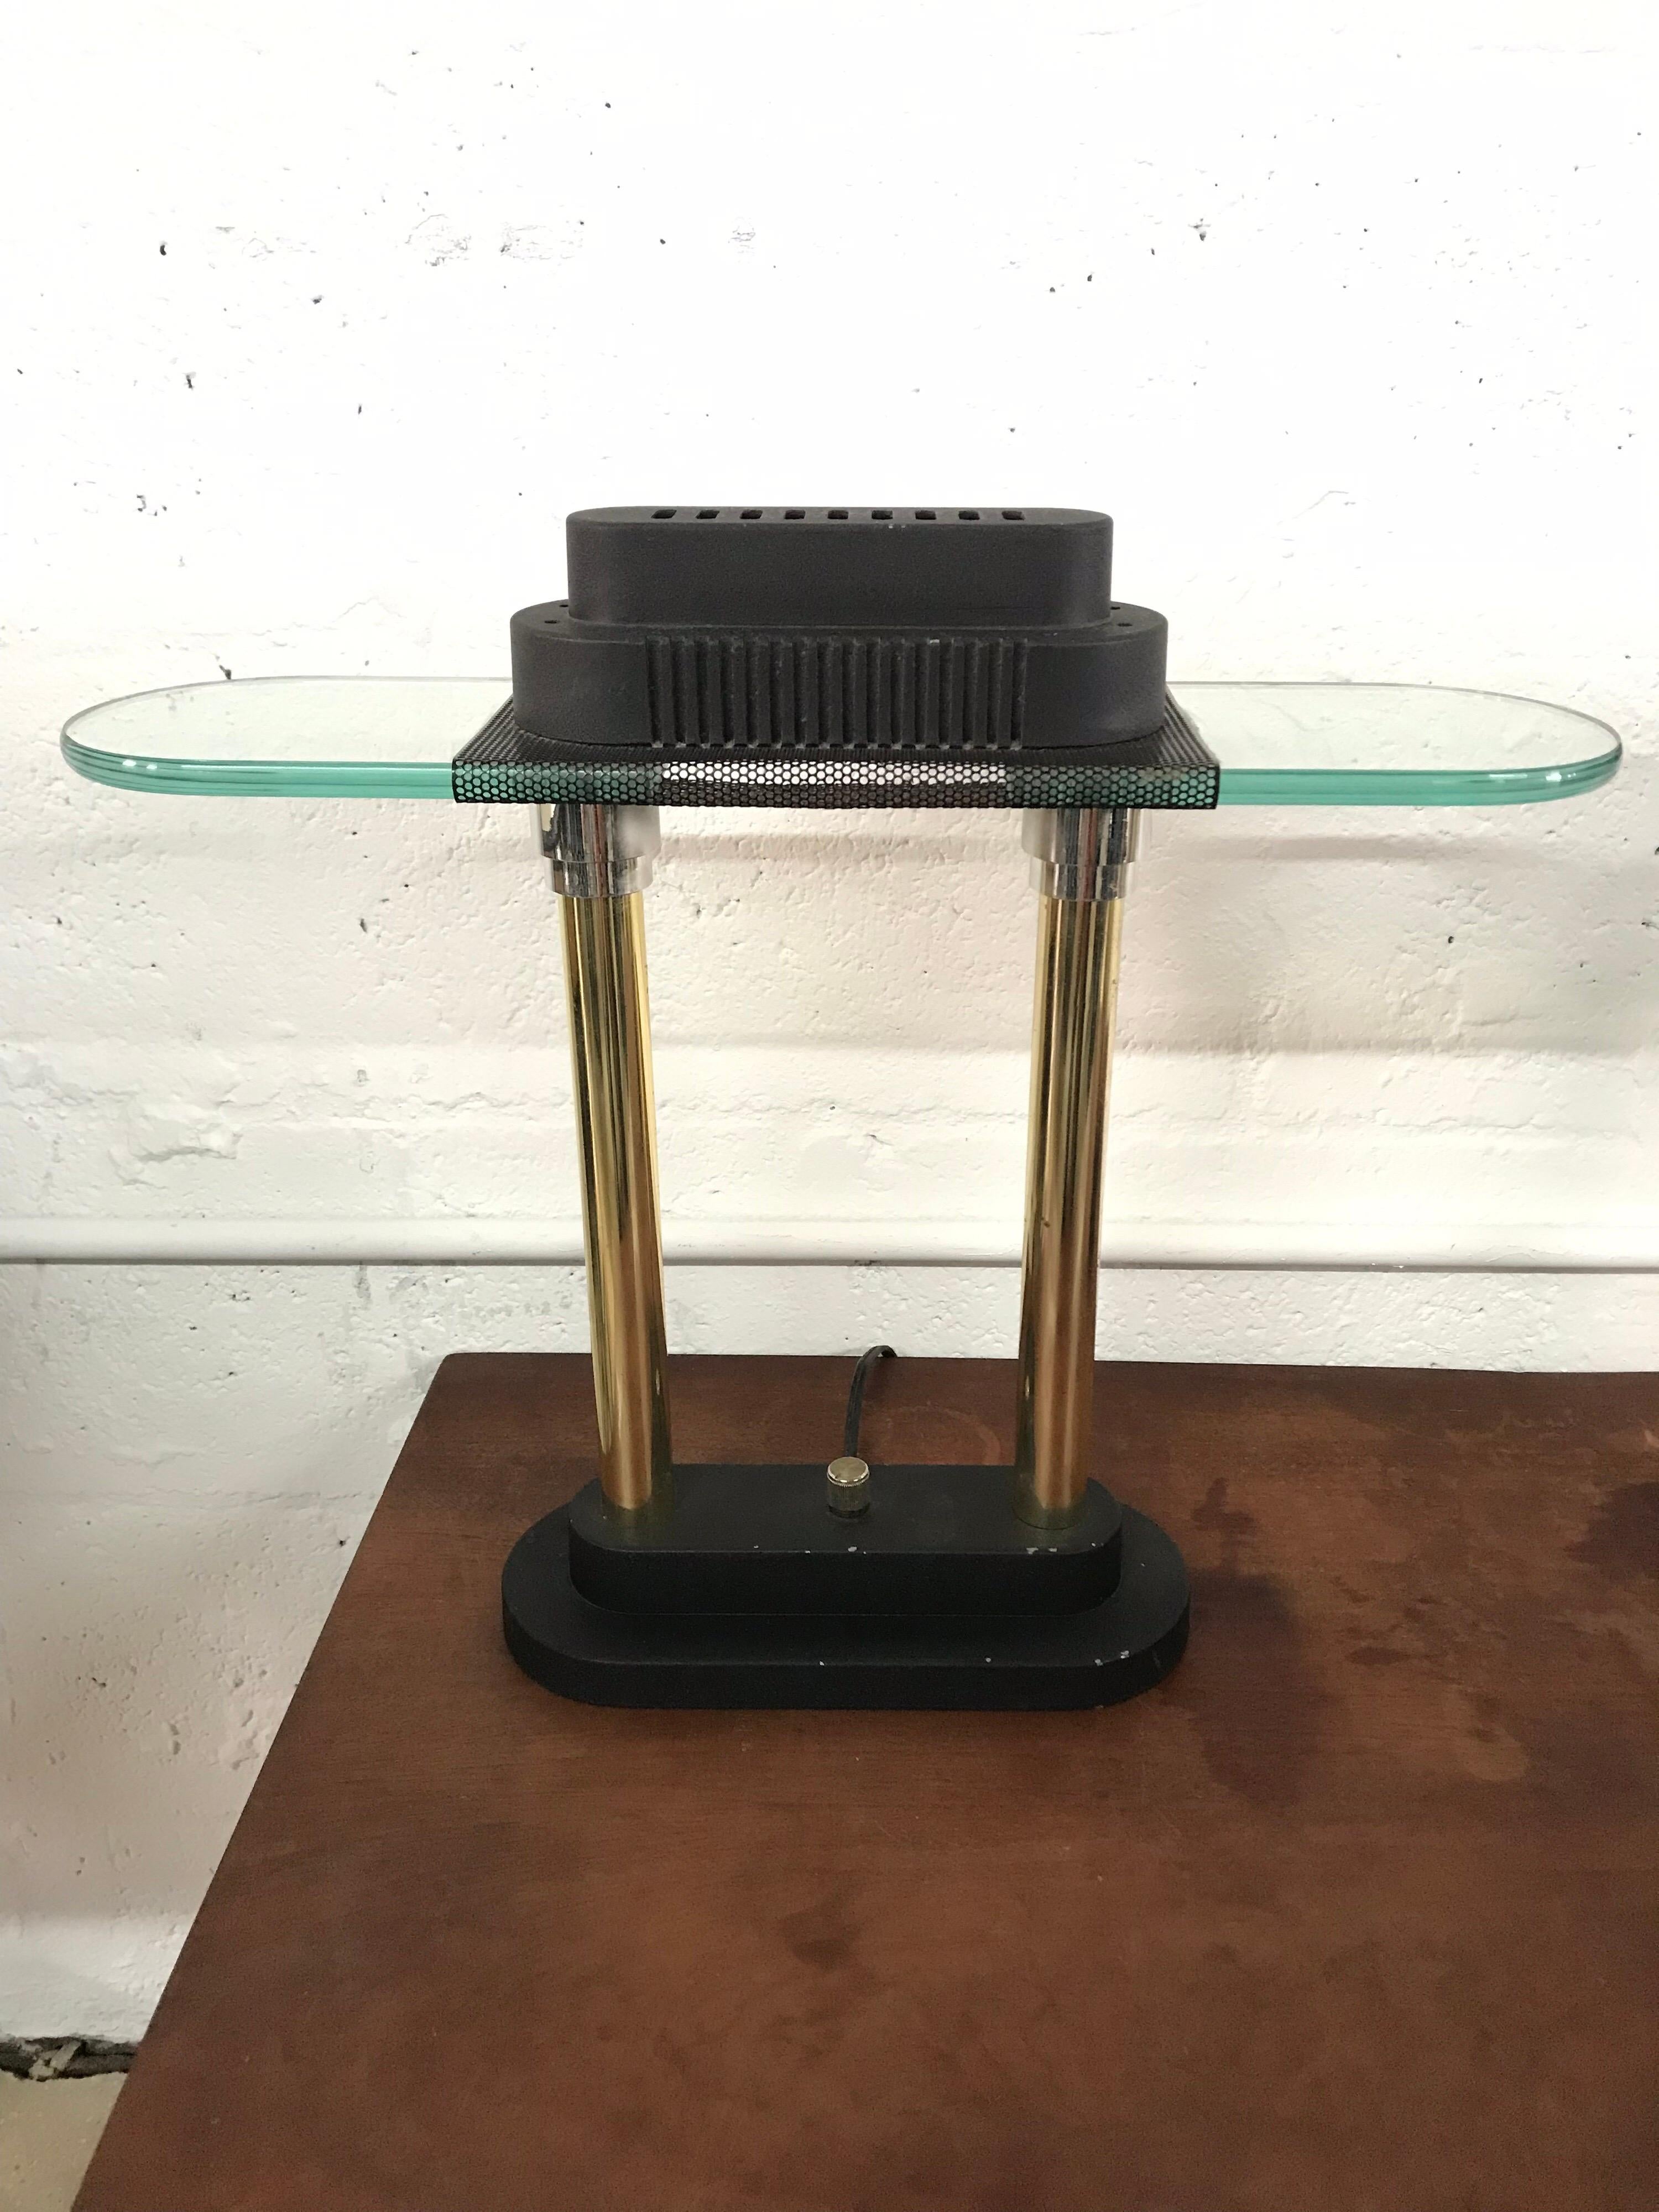 Pair of table, desk or library lamps rendered in glass, brass, chrome, and black painted and perforated steel in the style of Ettore Sottsass for Memphis Group, by Robert Sonneman for George Kovacs, Postmodern.